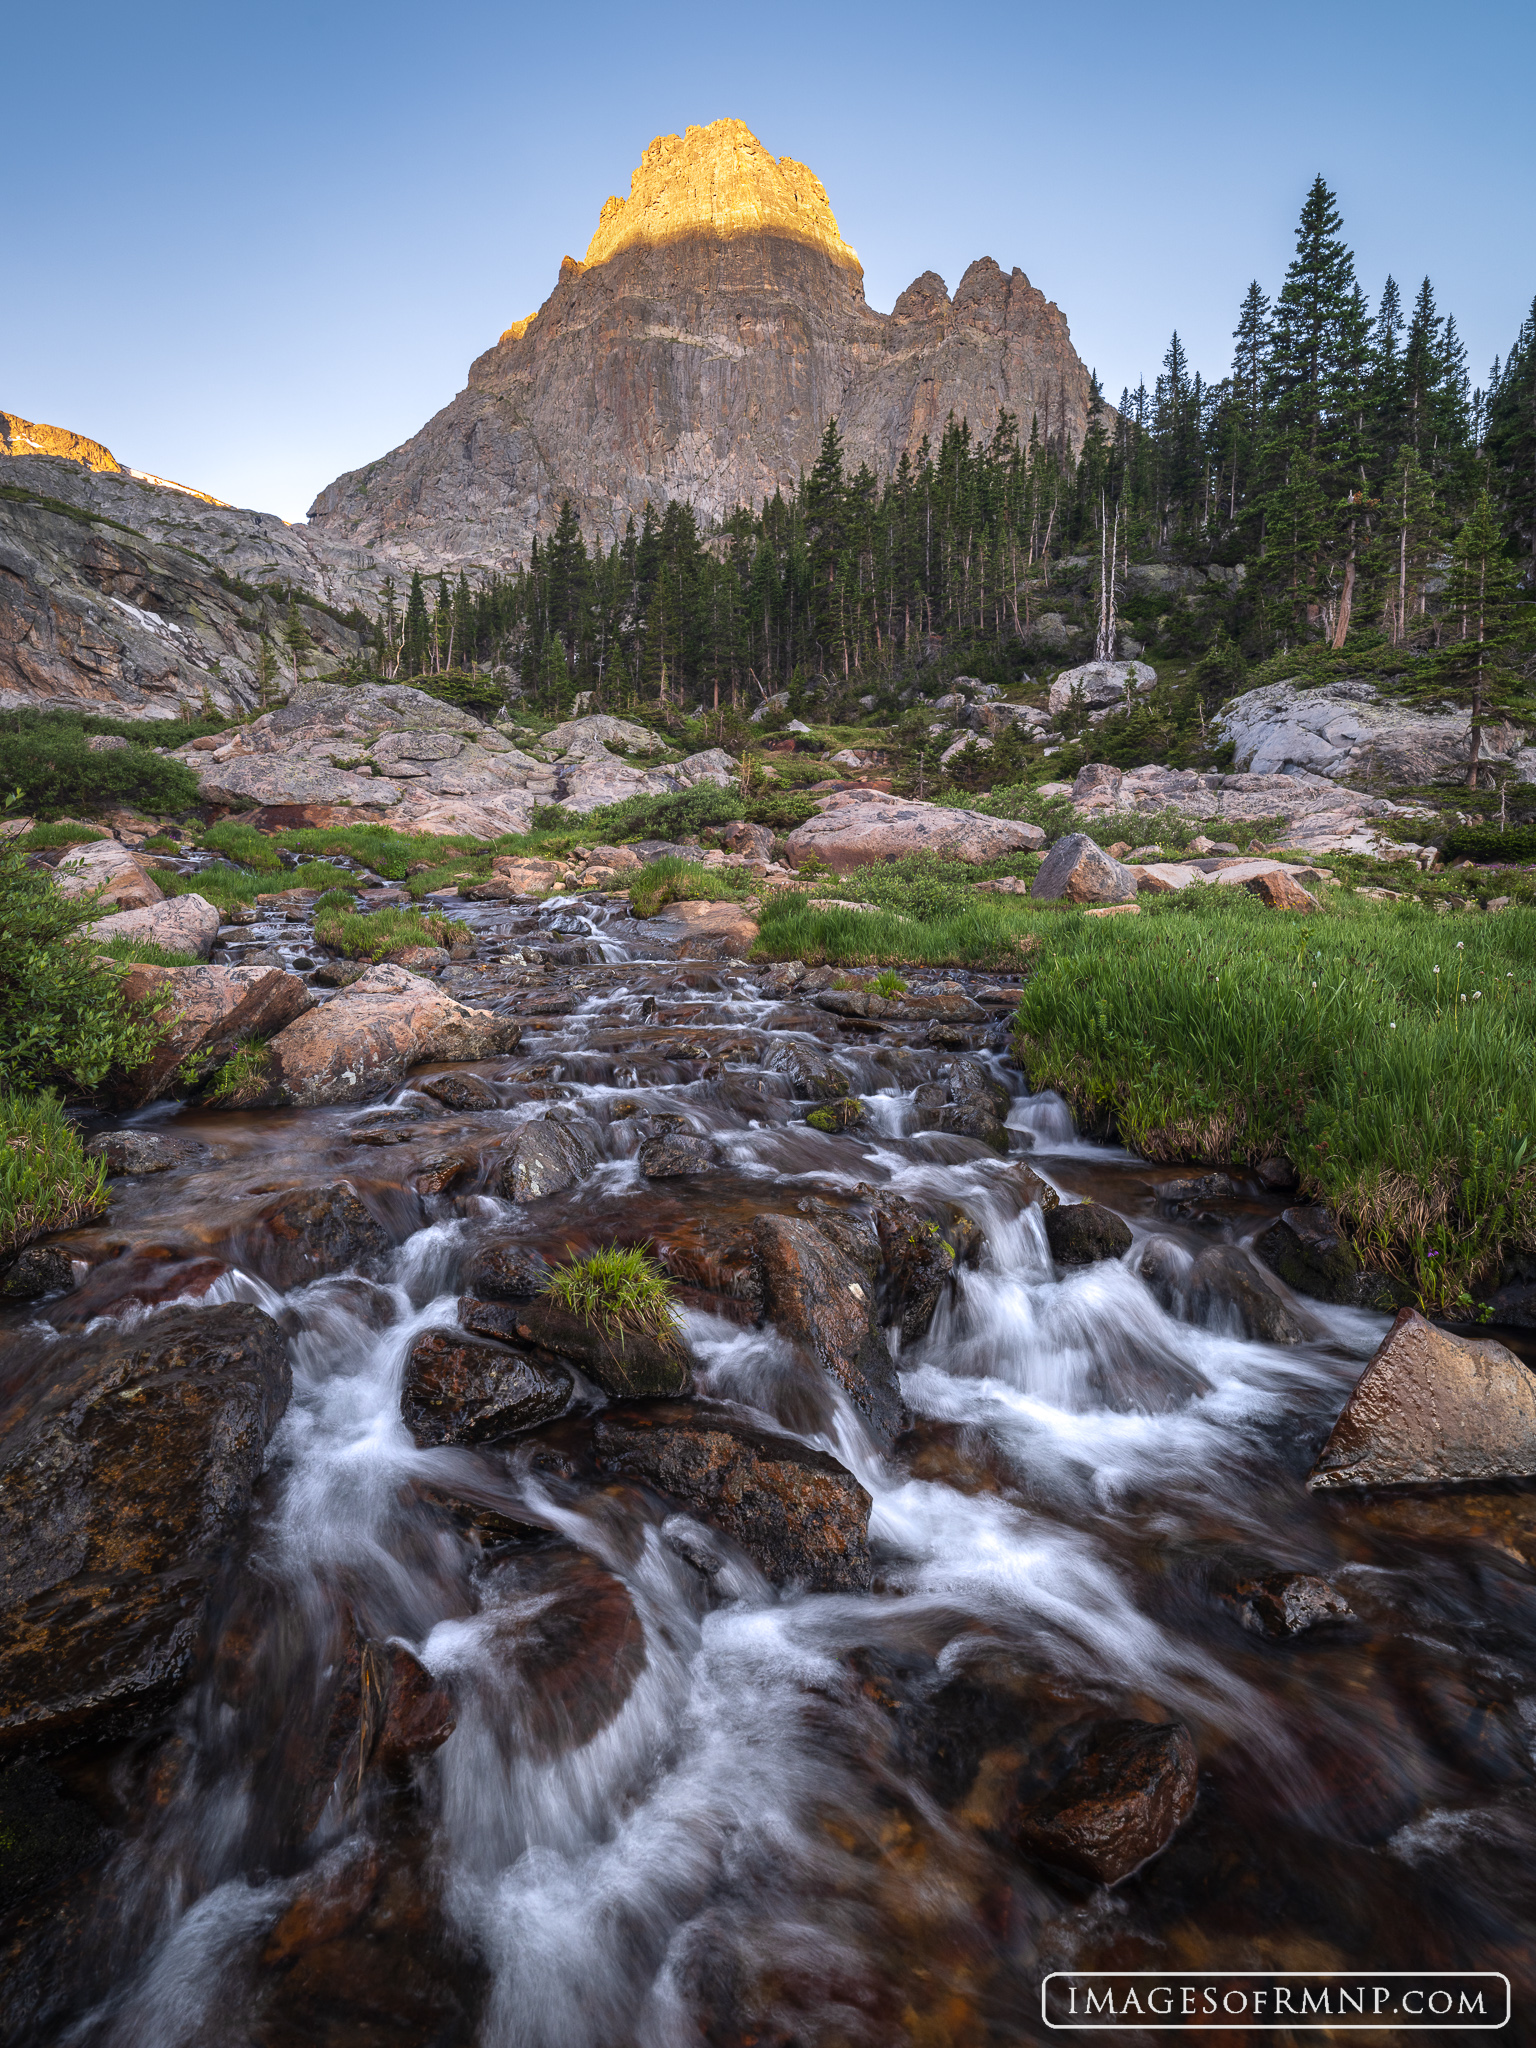 A jagged peak awakens in a remote valley in Rocky Mountain National Park. As you view this image, hear the sound of the rushing...